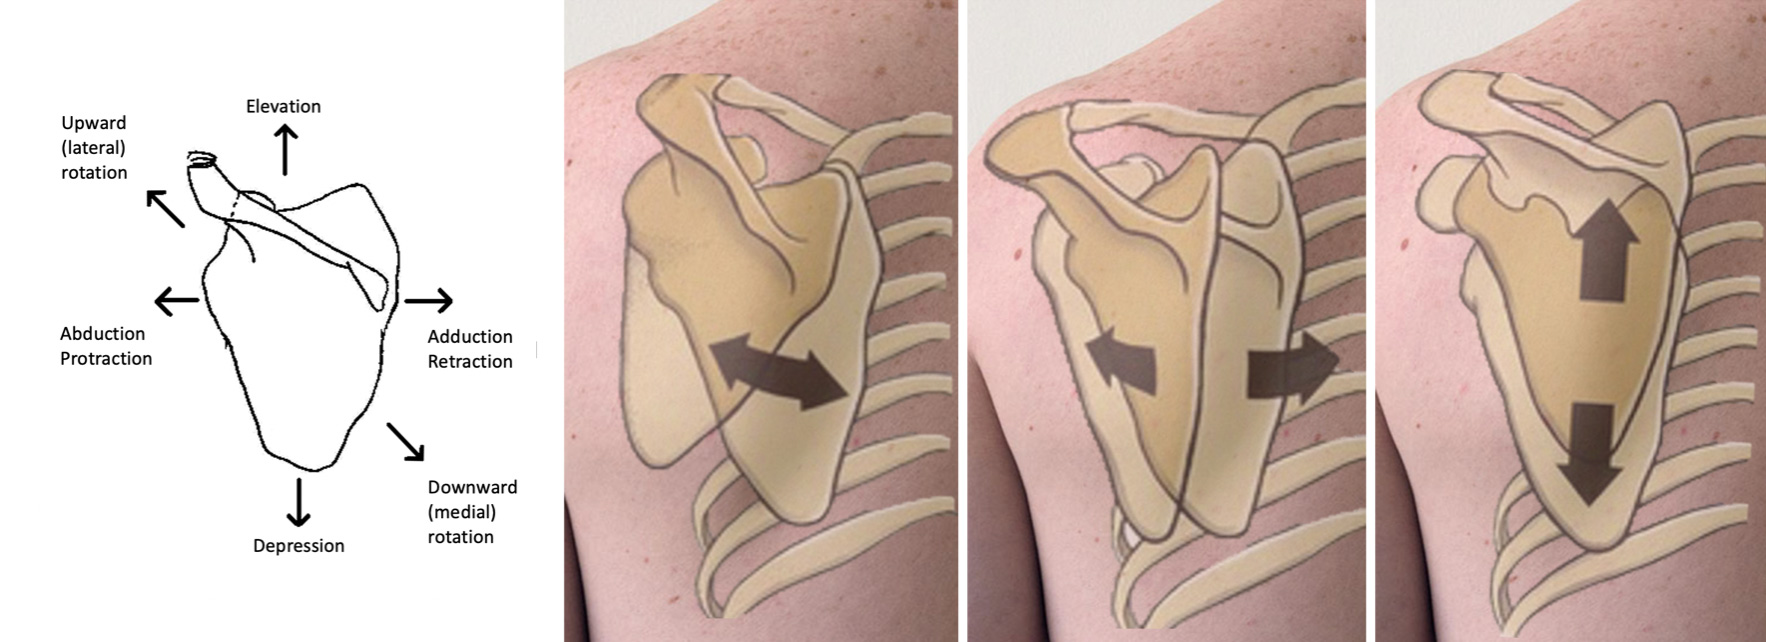 Scapulothoracic movements of the shoulder girdle